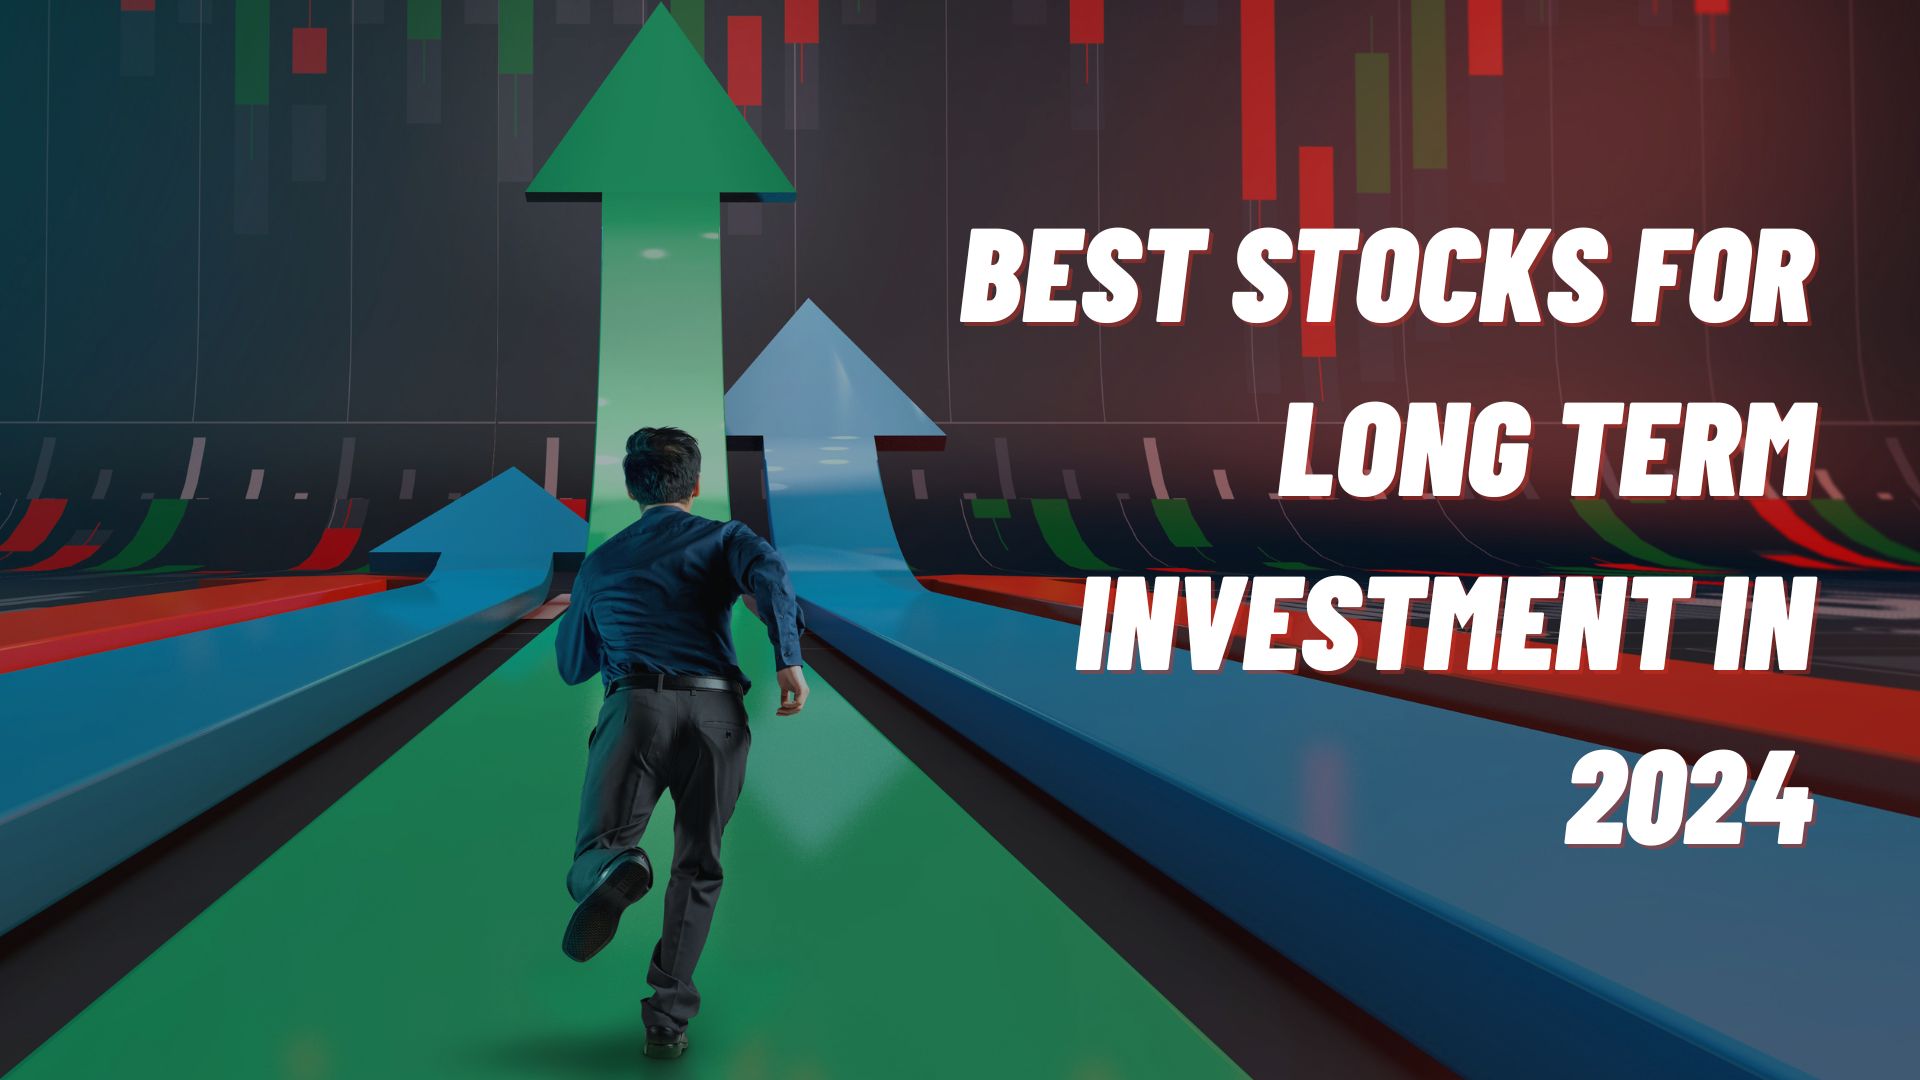 Best Stocks for Long Term Investment in 2024